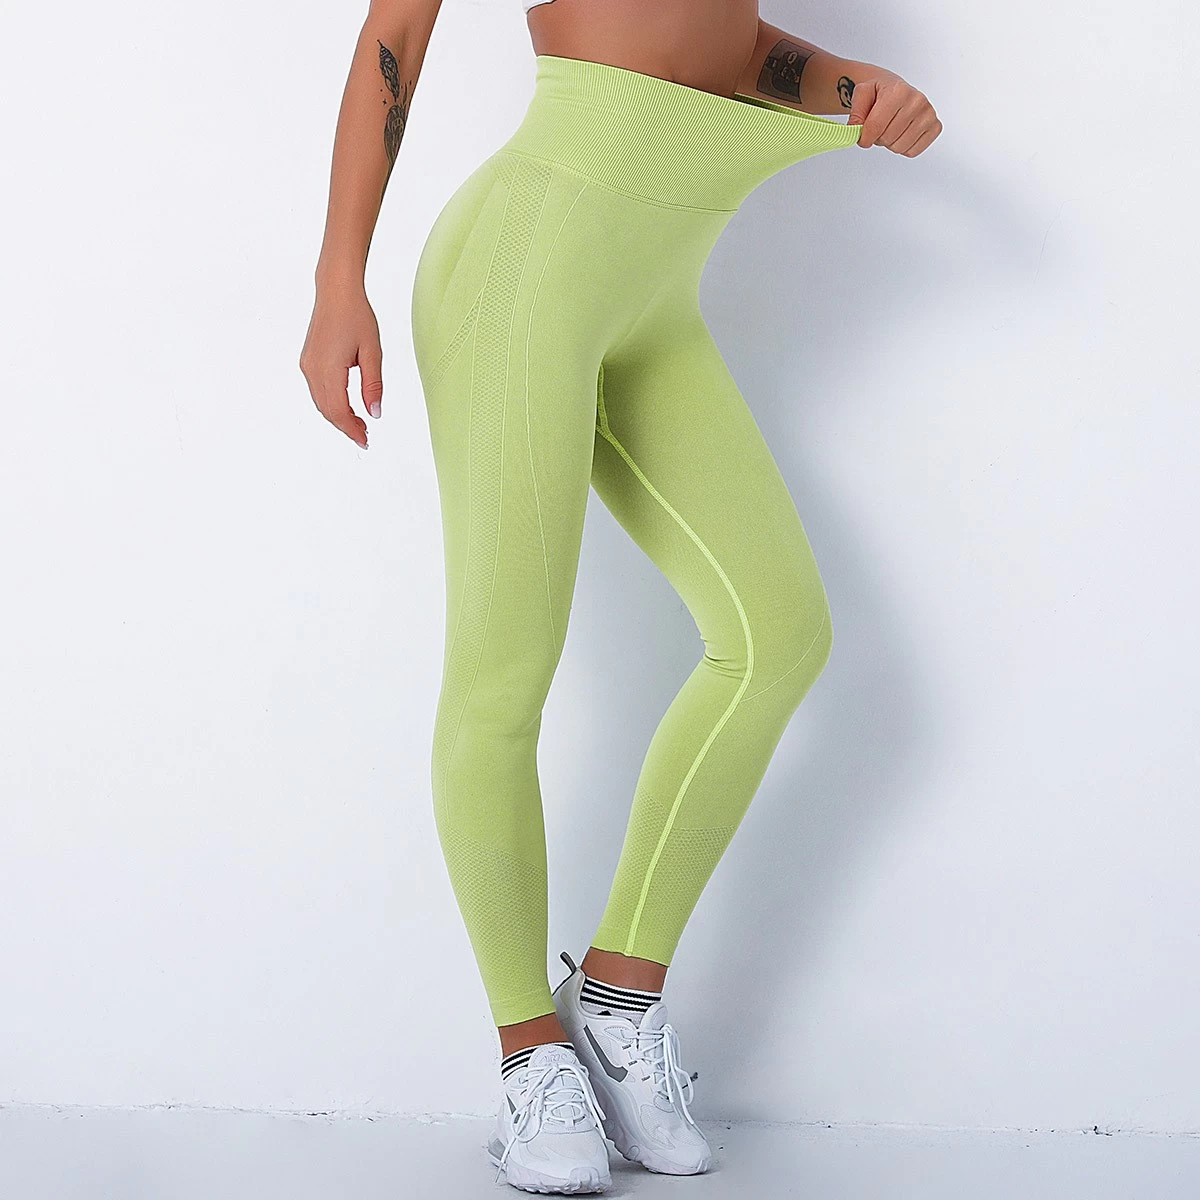 S-SHAPER High Waisted Workout Leggings for Women Compression Tummy Control Butt Lifting Soft Seamless Yoga Pants Manufacturers